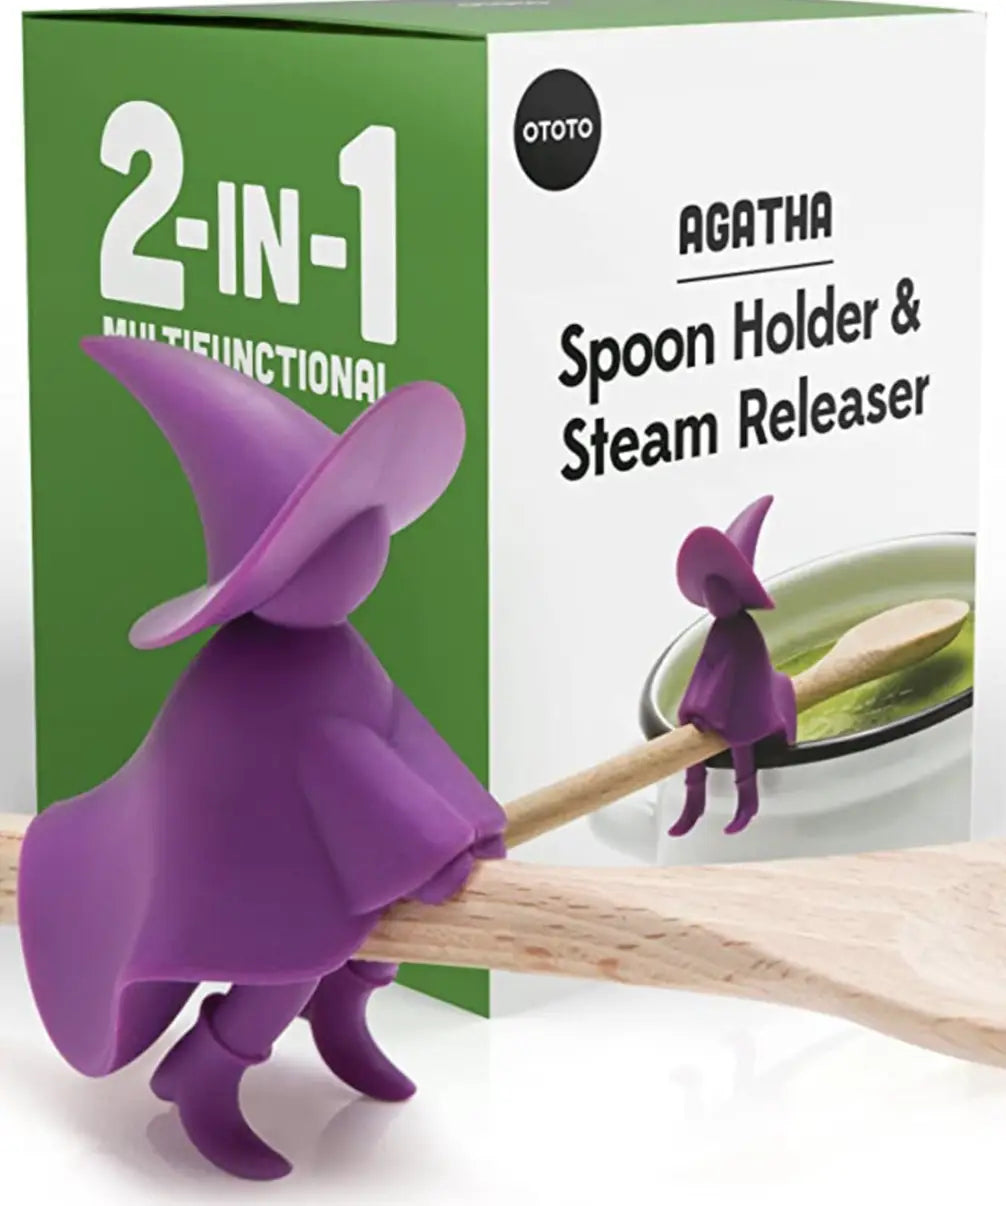 OTOTO Agatha Witch Spoon Holder and Steam Releaser